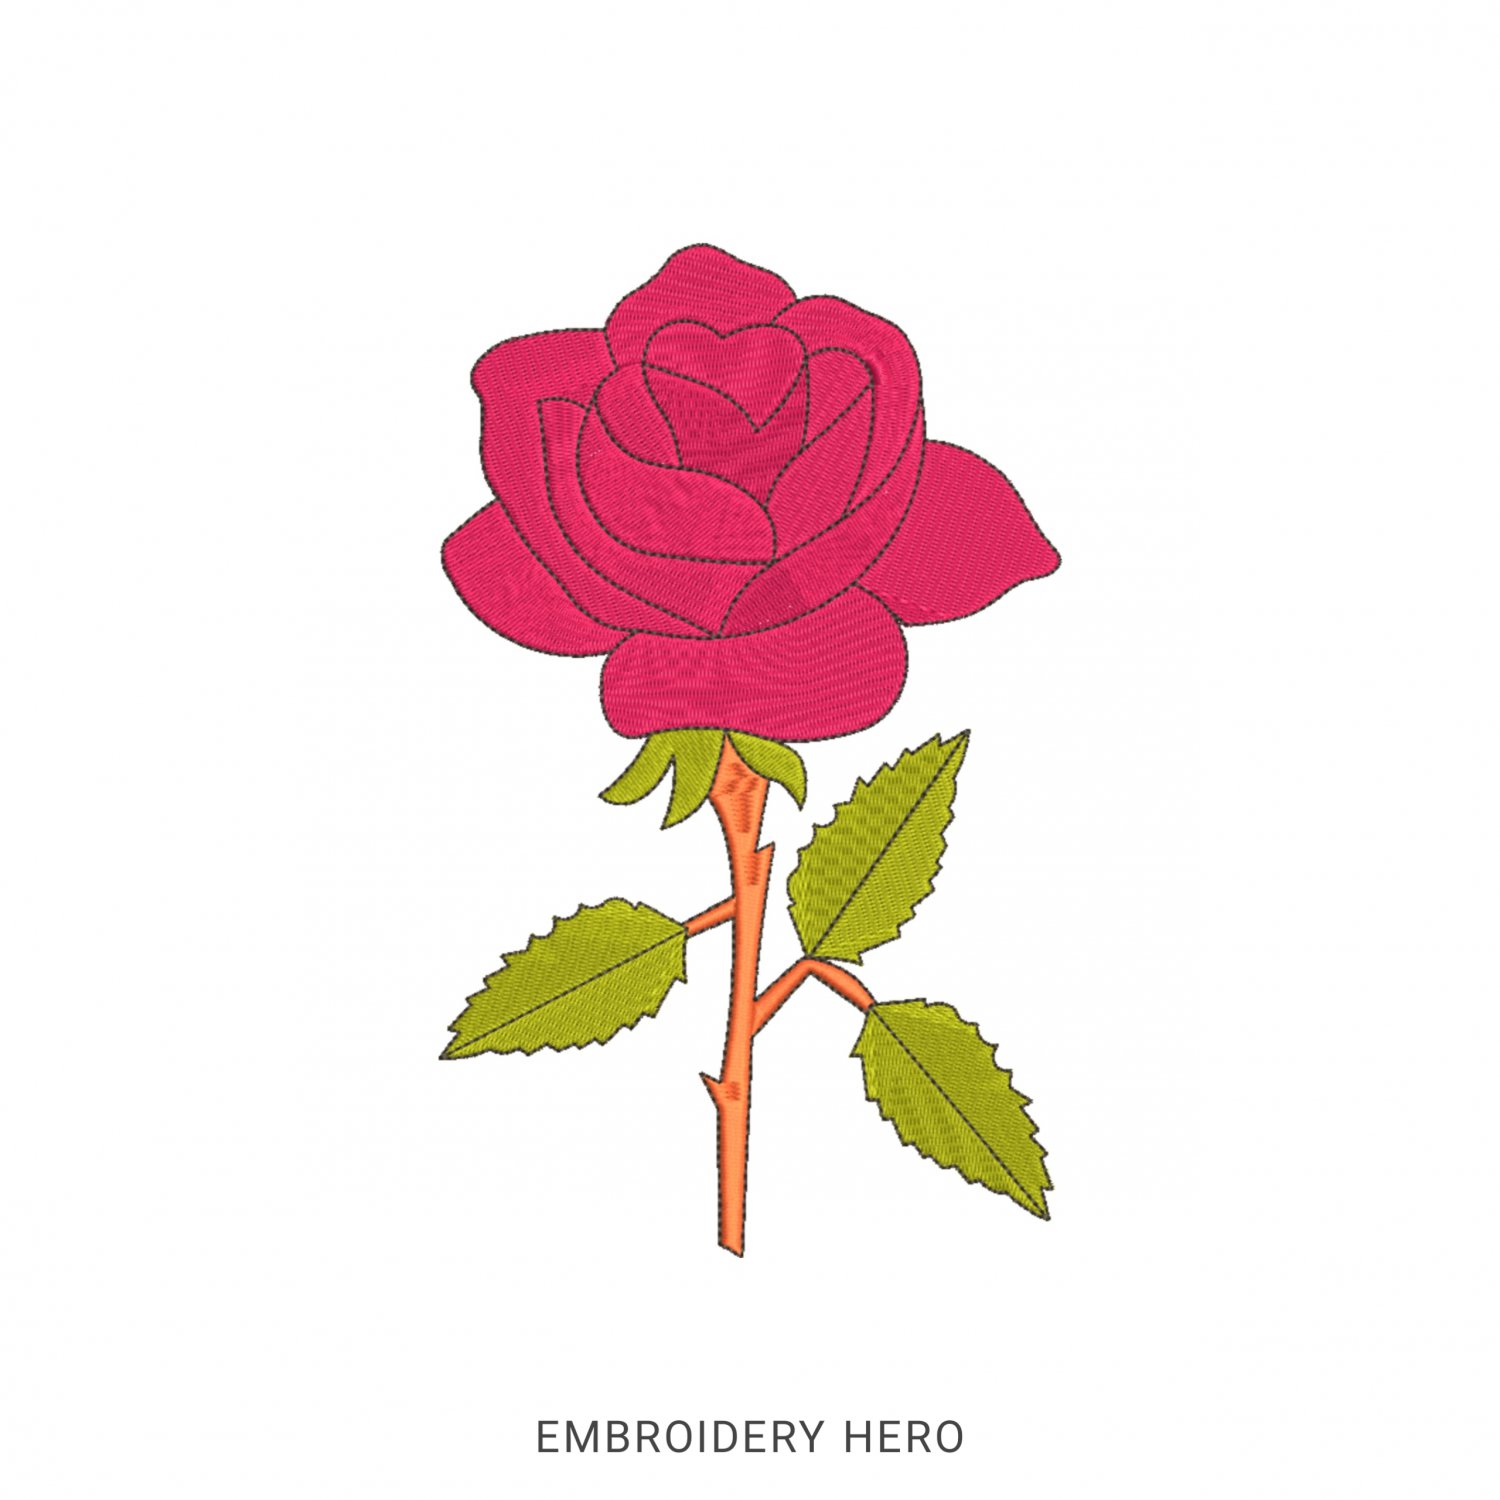 Flower embroidery design for embroidery machines